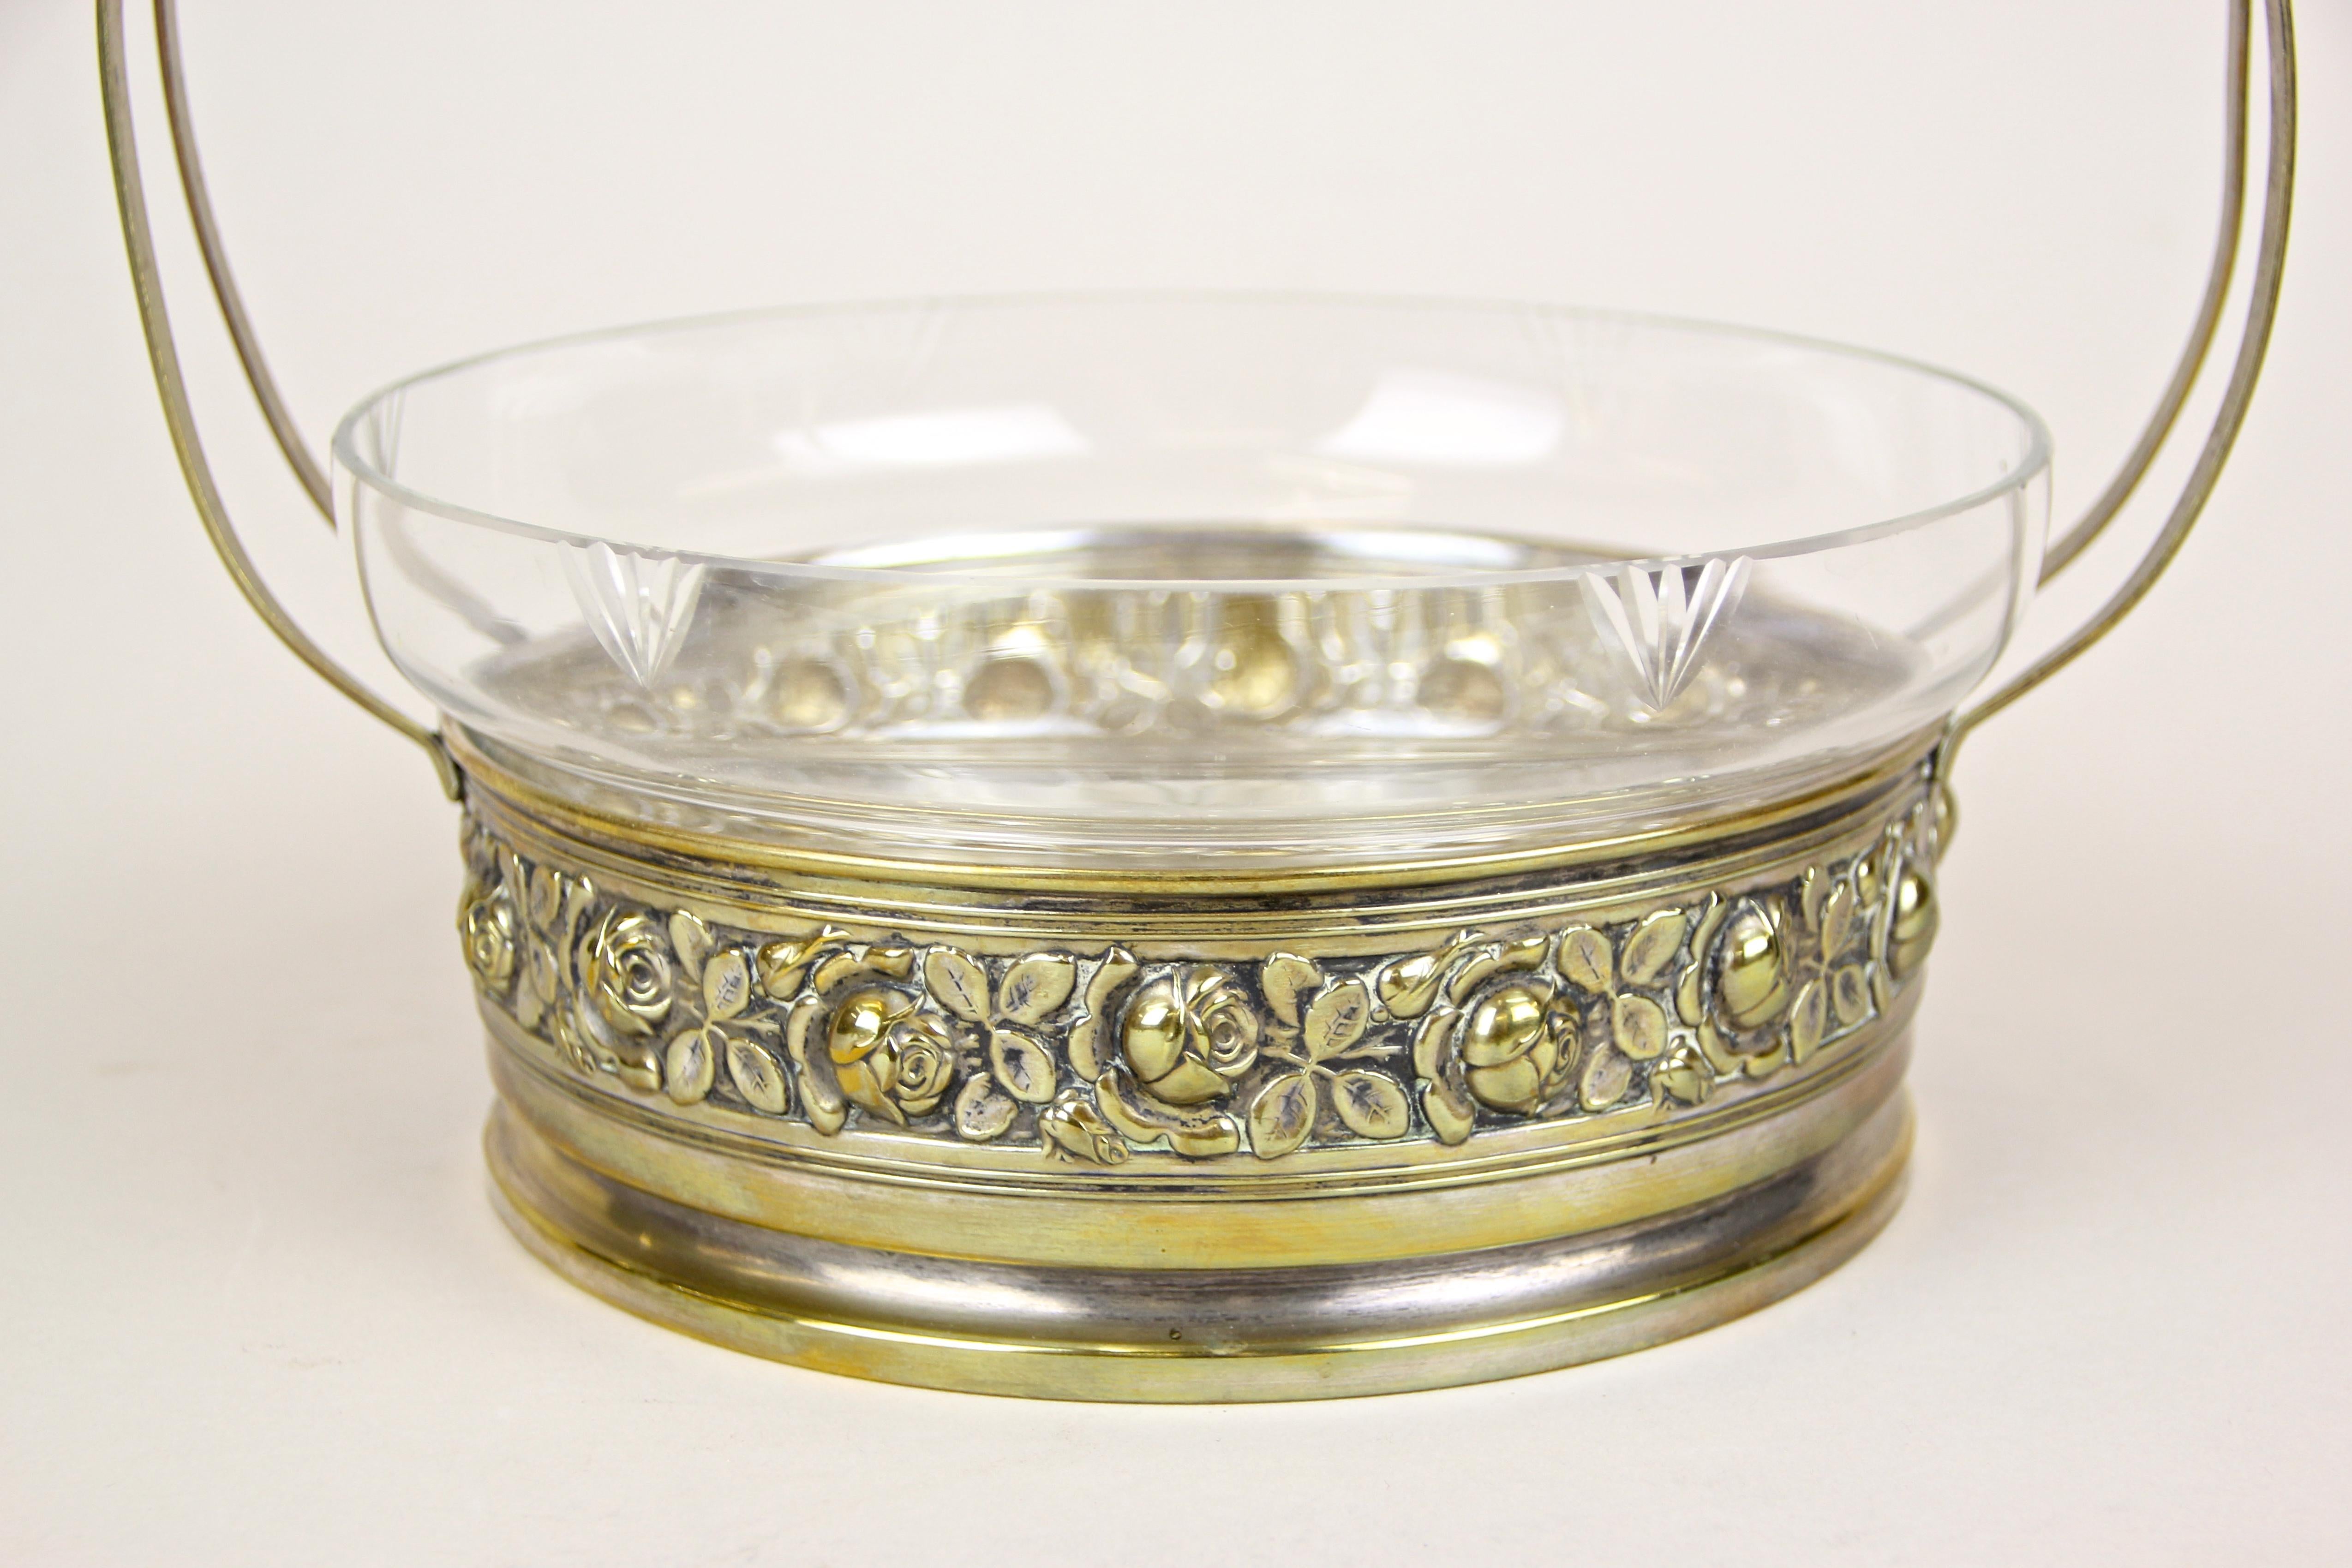 Very decorative Art Nouveau Centerpiece impressing with an inserted, engraved Glass Bowl in a Brass Basket processed in Austria around 1910. The delicate designed base shows the famous embossed viennese rose-design, made of fine brass. An artfully